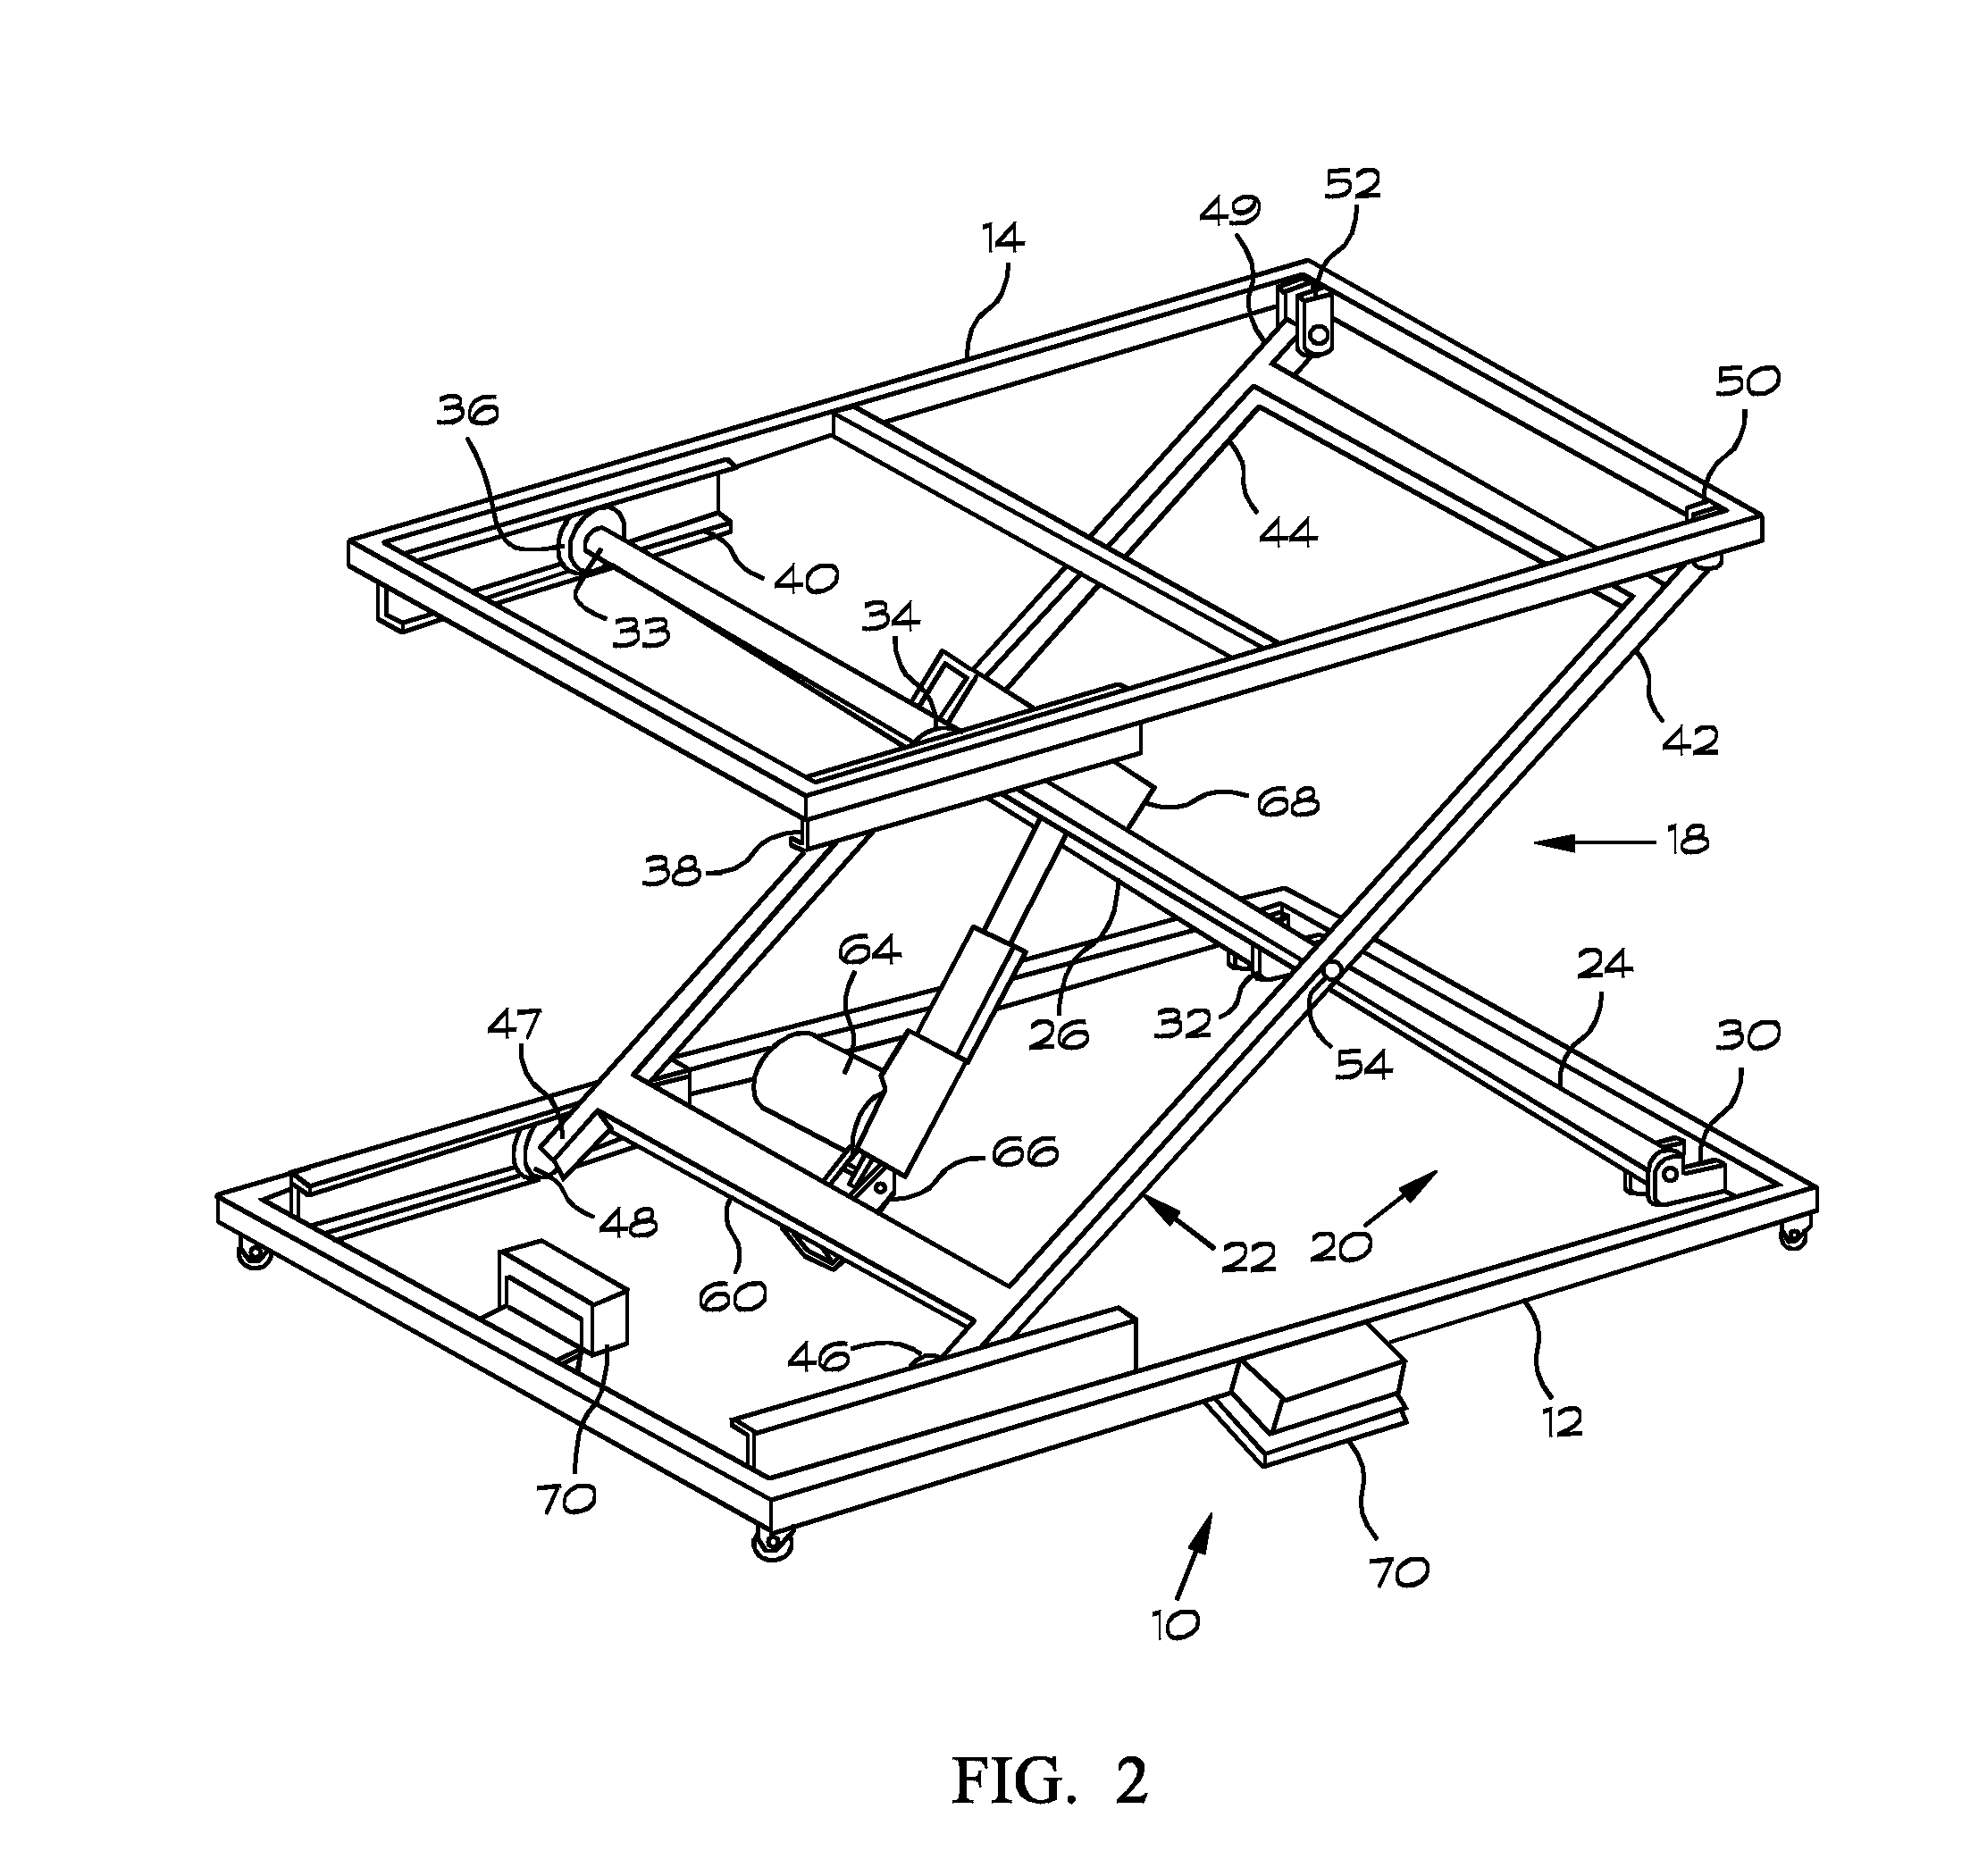 Crib frame with lifting device